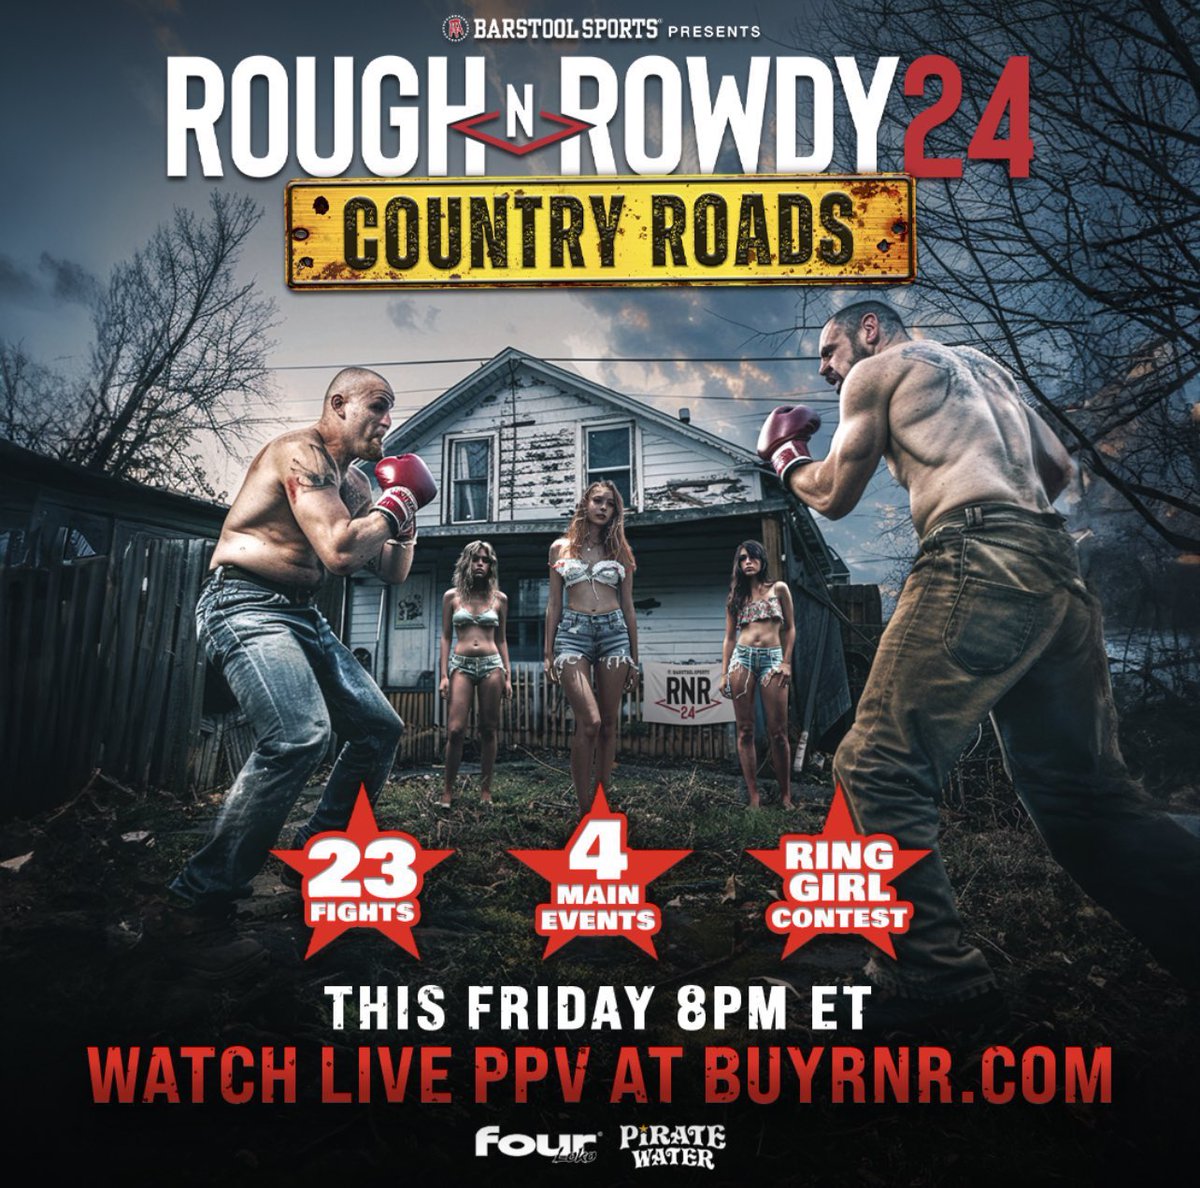 Looking for something new to watch tonight? RnR heads back to their West Virginia roots for a MASSIVE fight night! Over 20 fights and 4 main events — plus the best broadcast team this side of Dodgeball (2004) BuyRnR.com